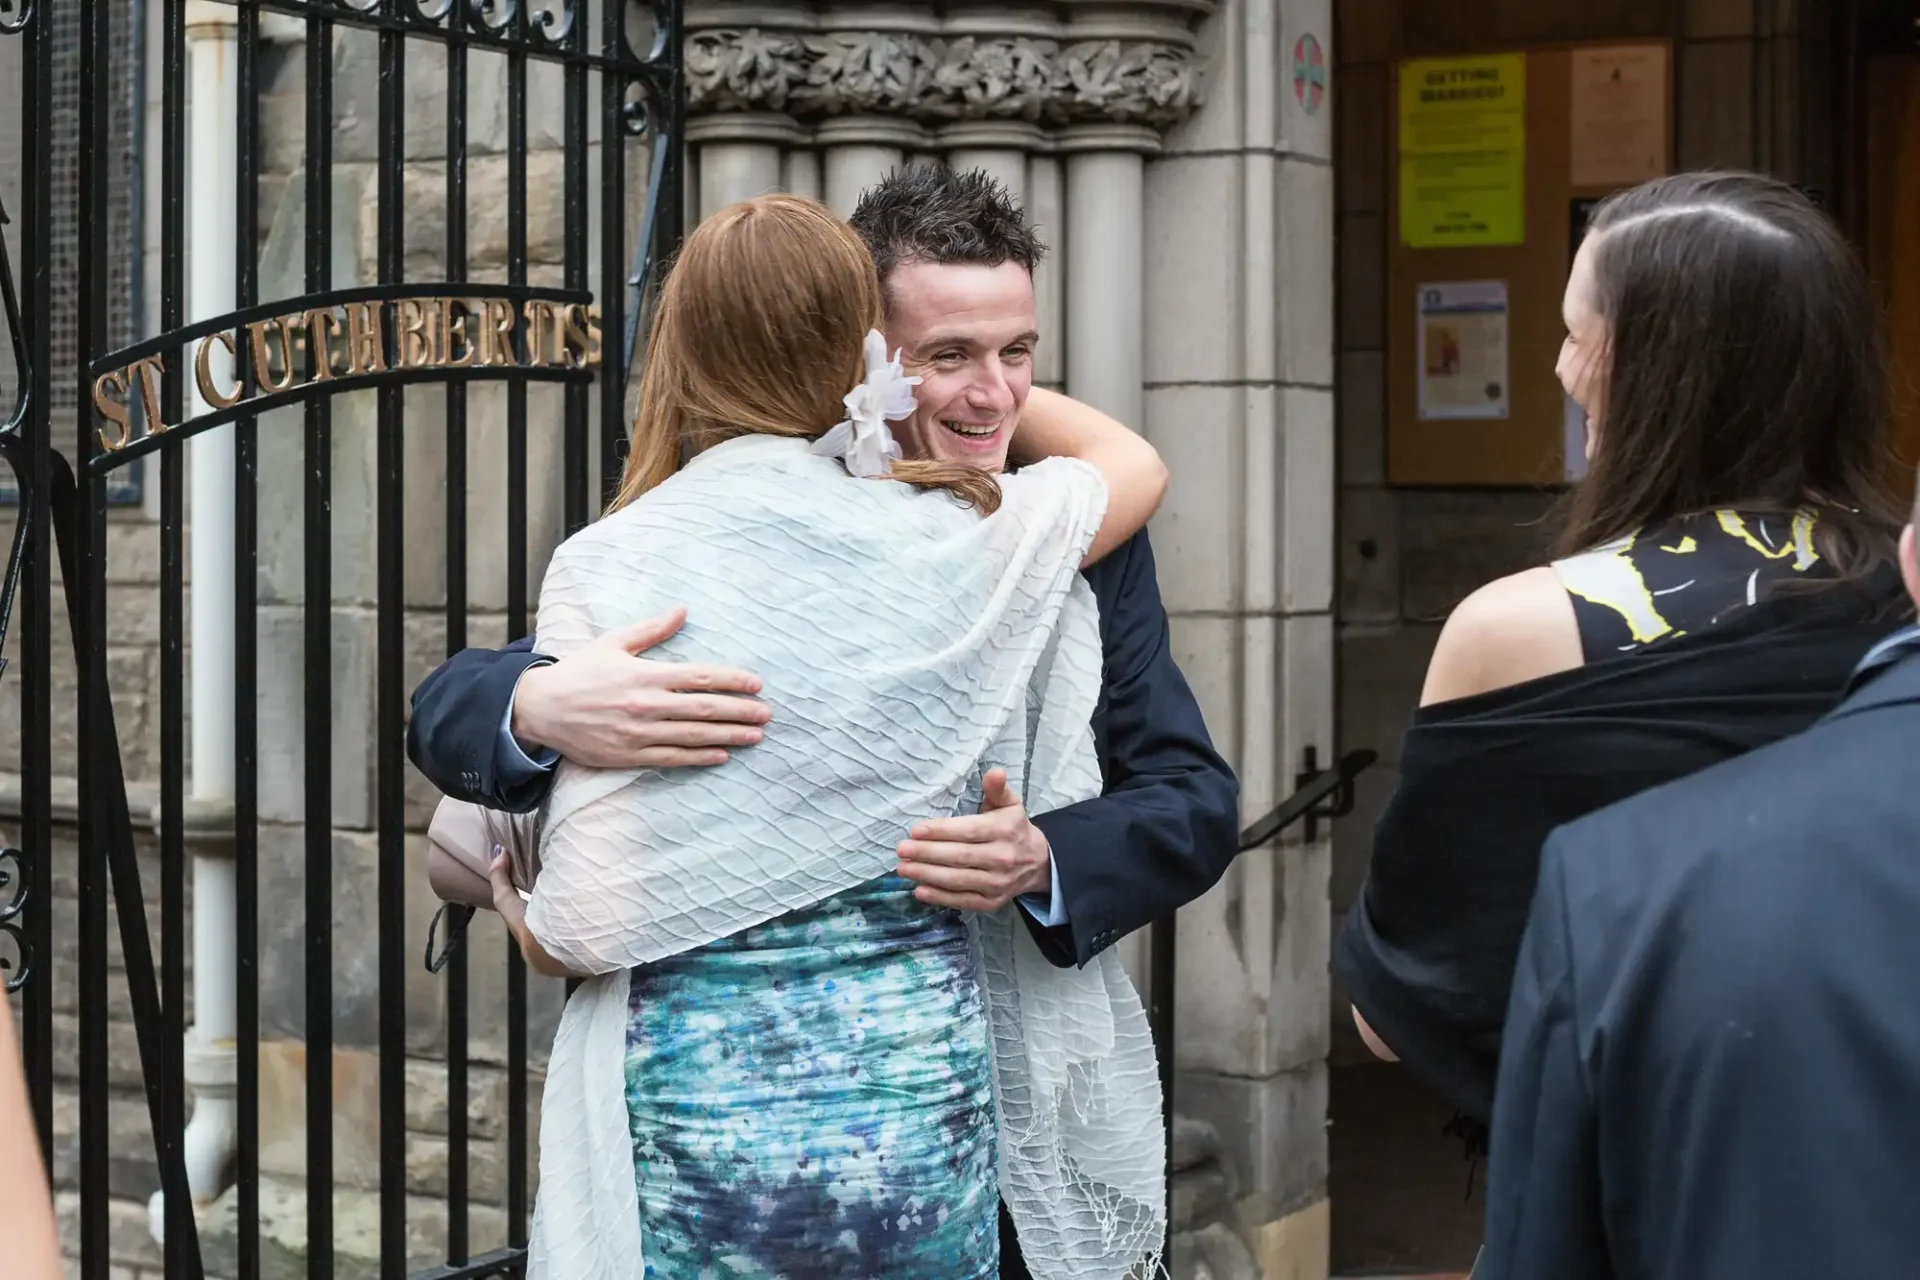 A man and a woman embracing joyfully outside a building, while another woman watches them.